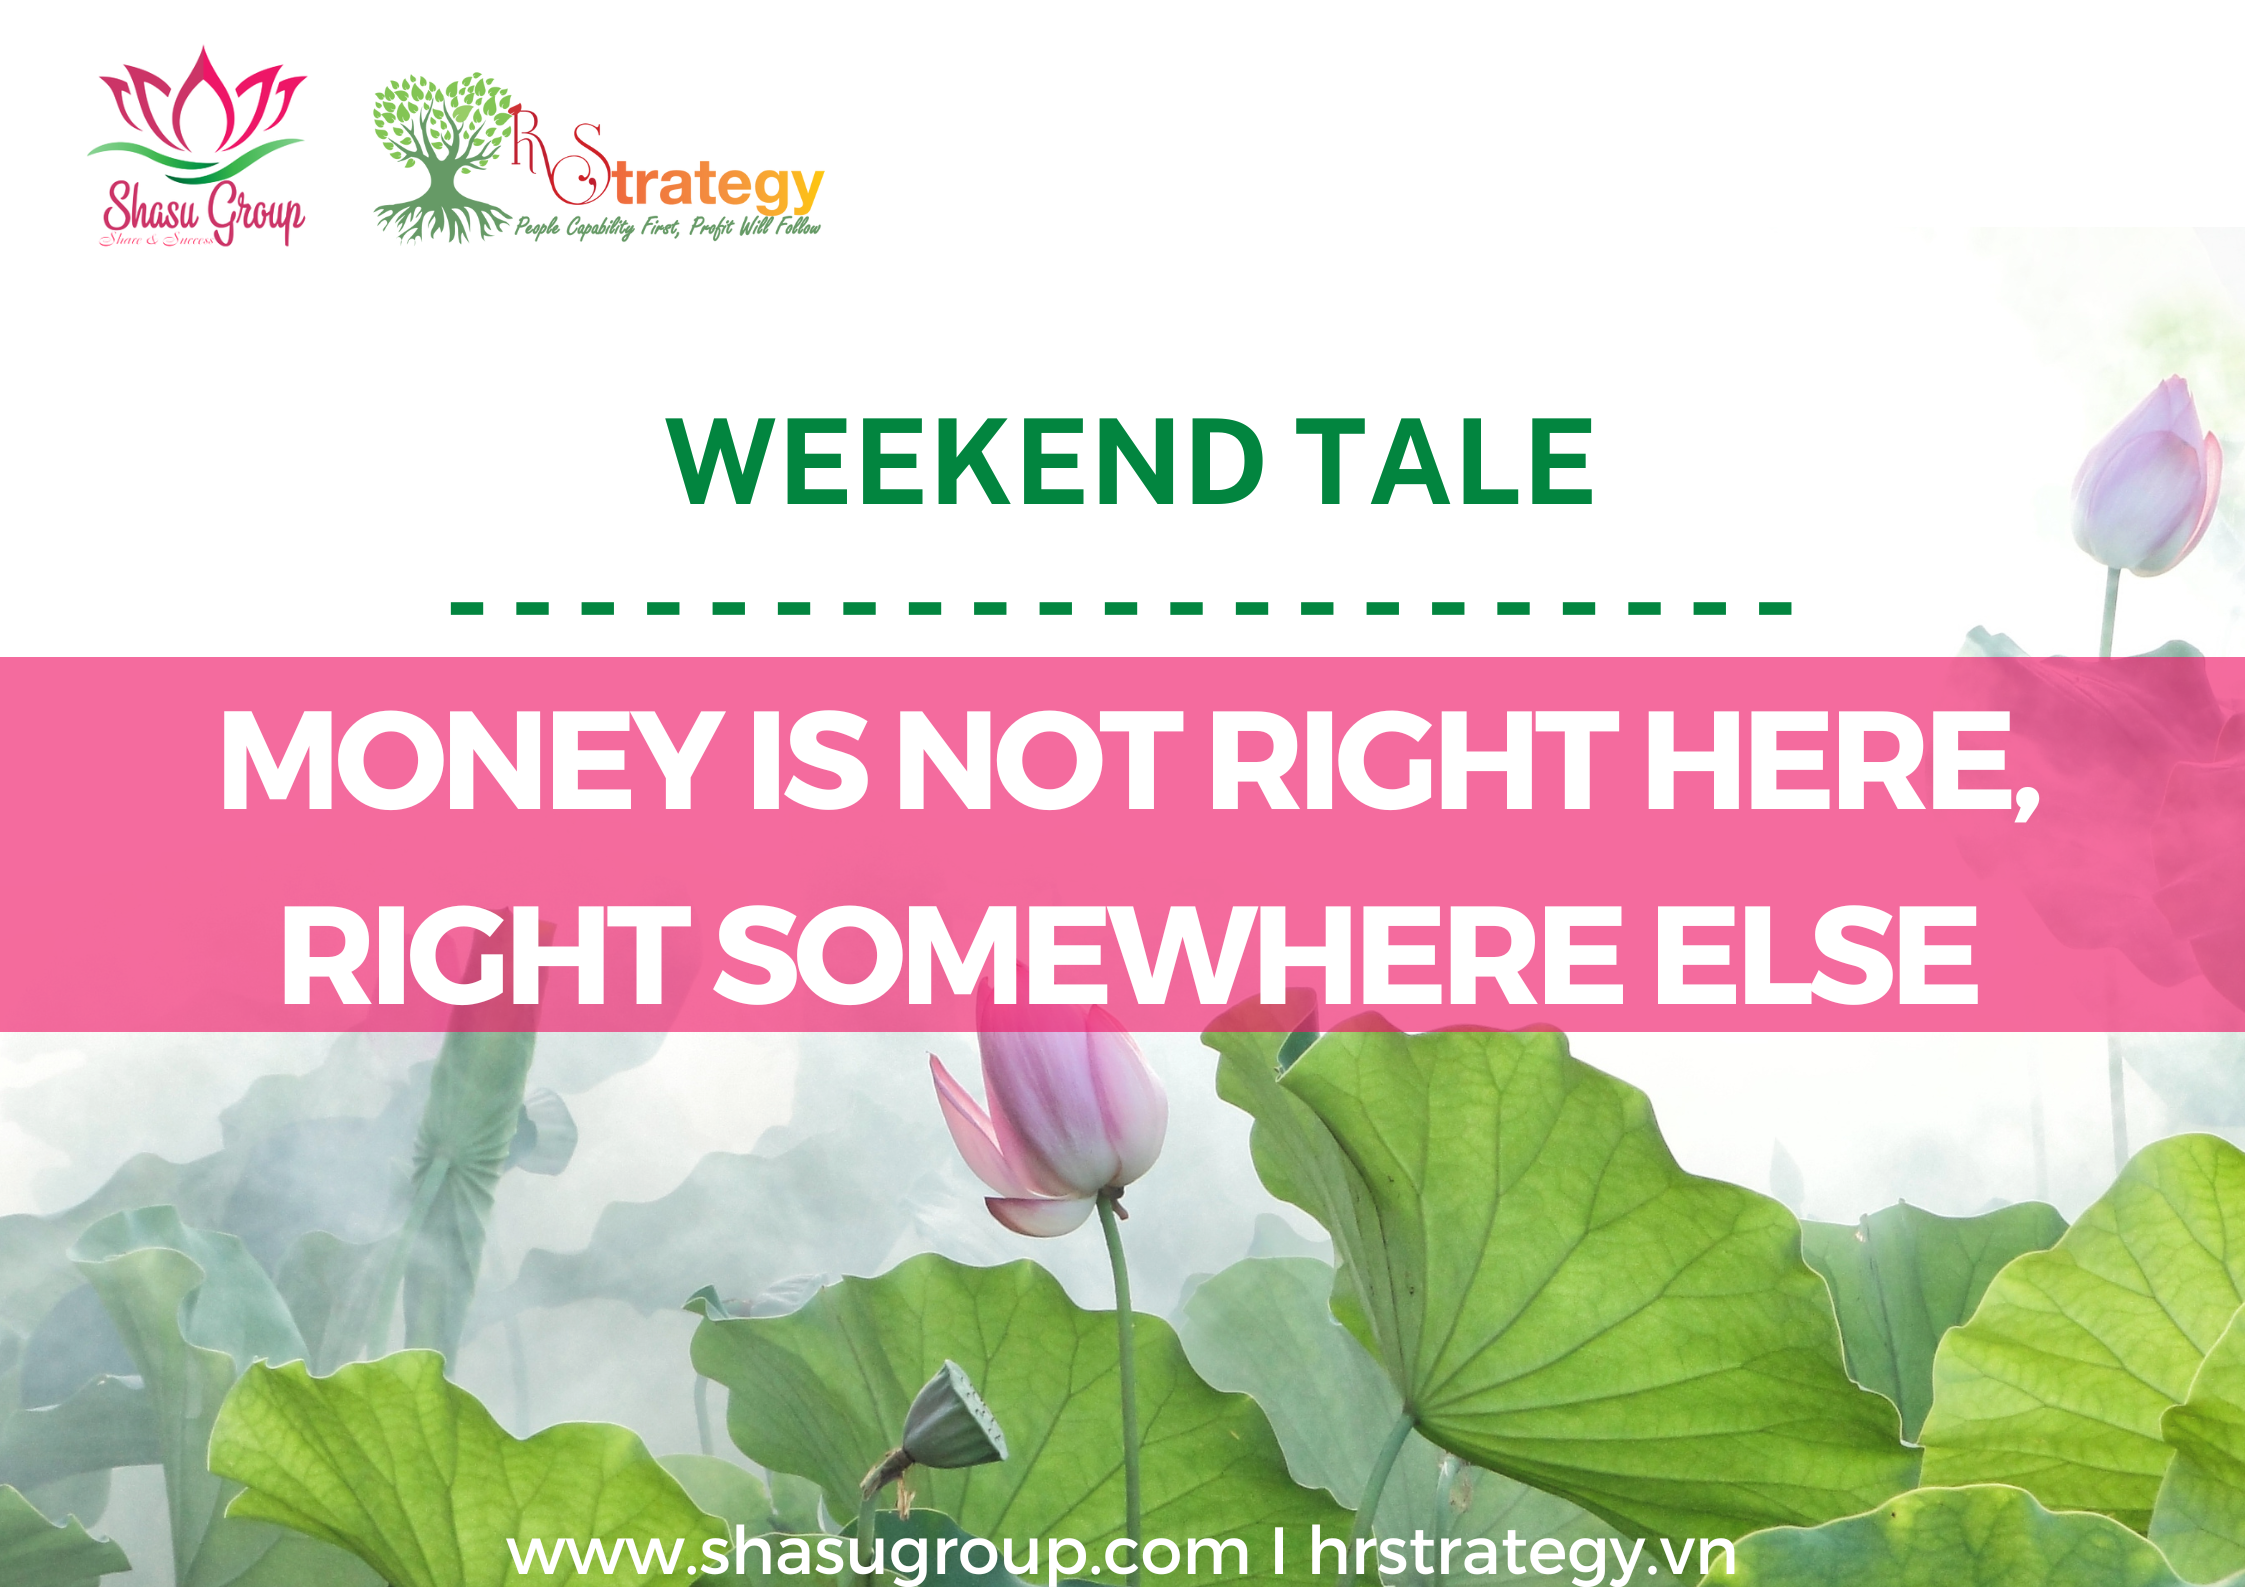 WEEKEND TALE NO. 156: MONEY IS NOT RIGHT HERE, RIGHT SOMEWHERE ELSE